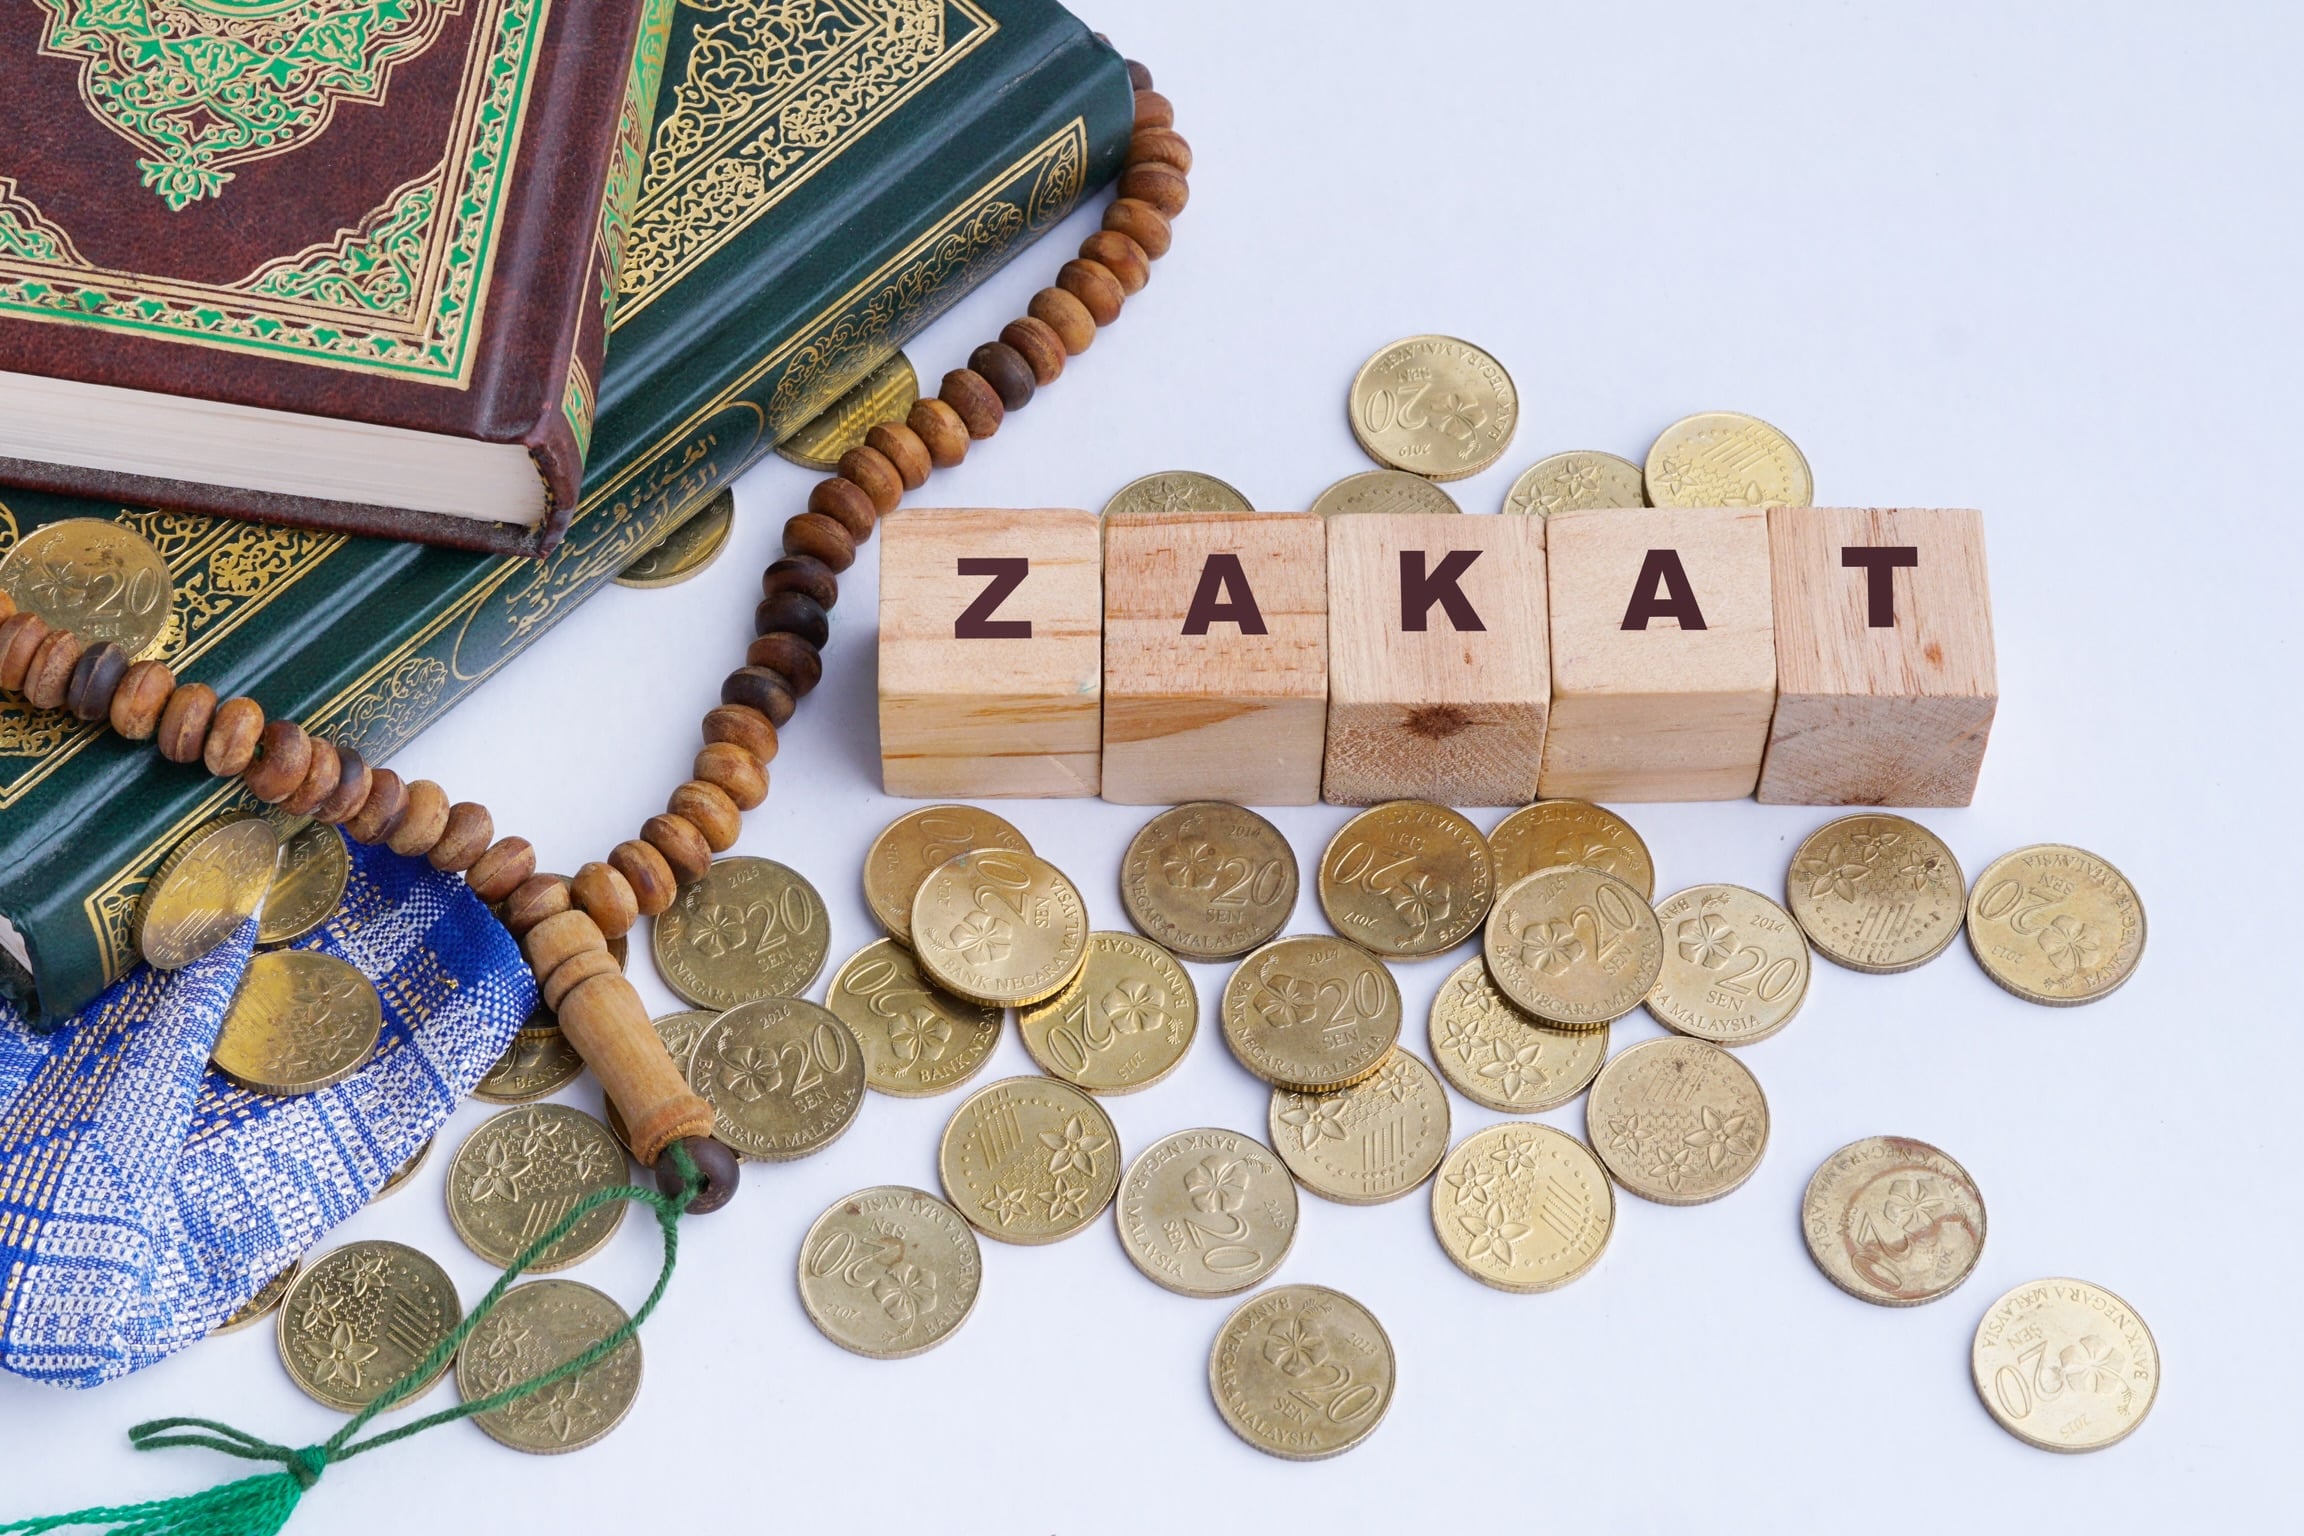 Zakat are charity taken for the poor few days before the end fasting in the Islamic holy month of Ramadan. Arabic characters translated: Holy Quran, the Holy book of Islam. Zakat Conceptual.